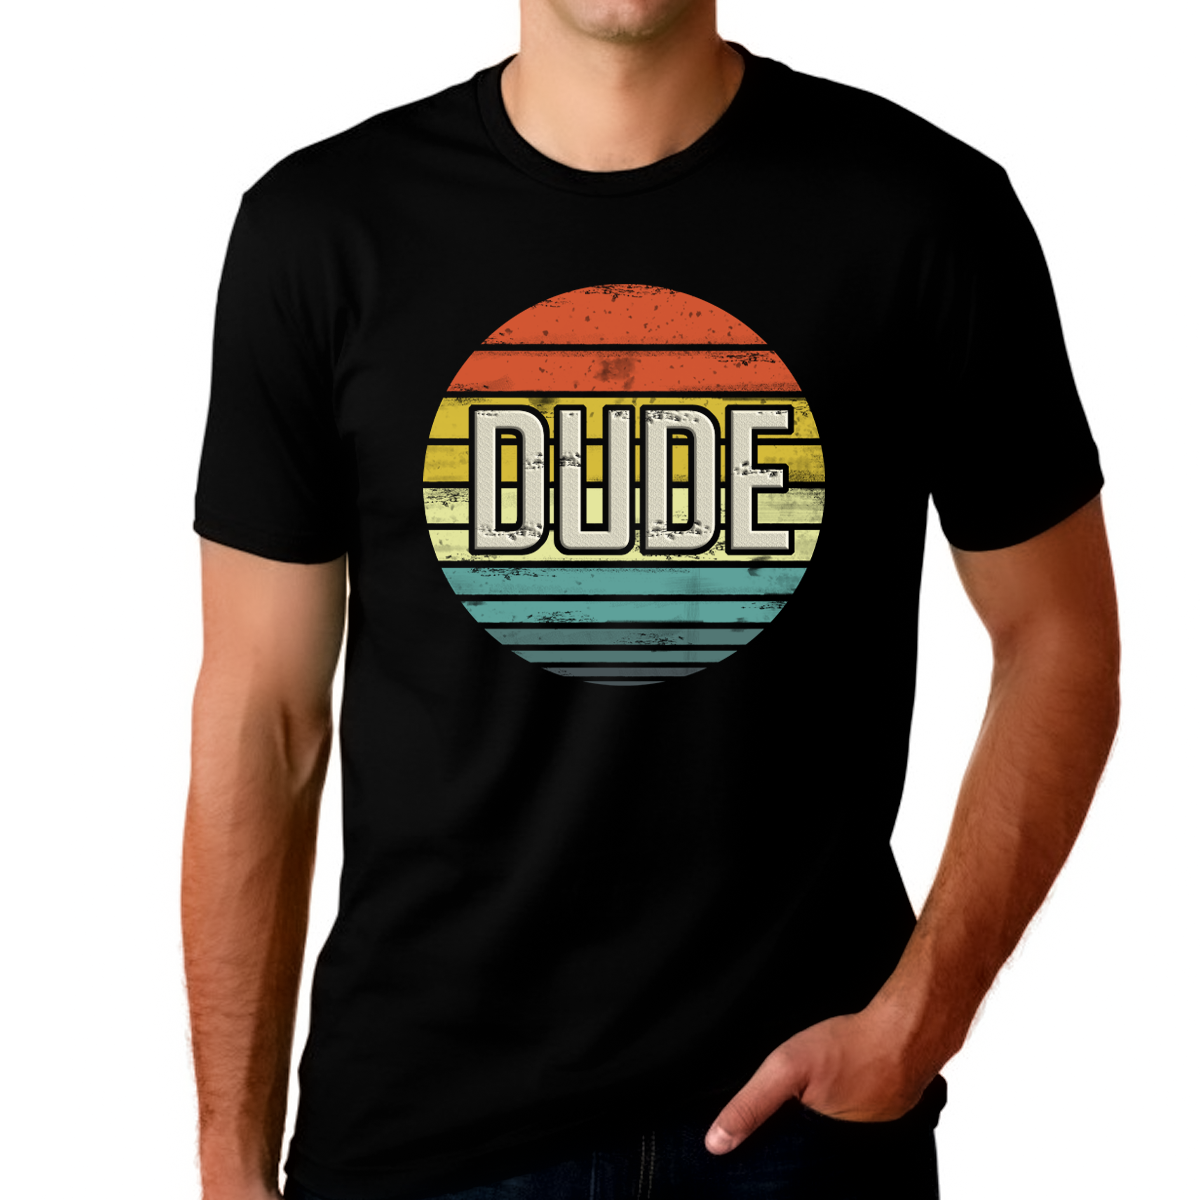 Perfect Dude Shirt for MEN - Perfect Dude Merchandise - Perfect Dude Retro Vintage Shirts for MEN - Fire Fit Designs